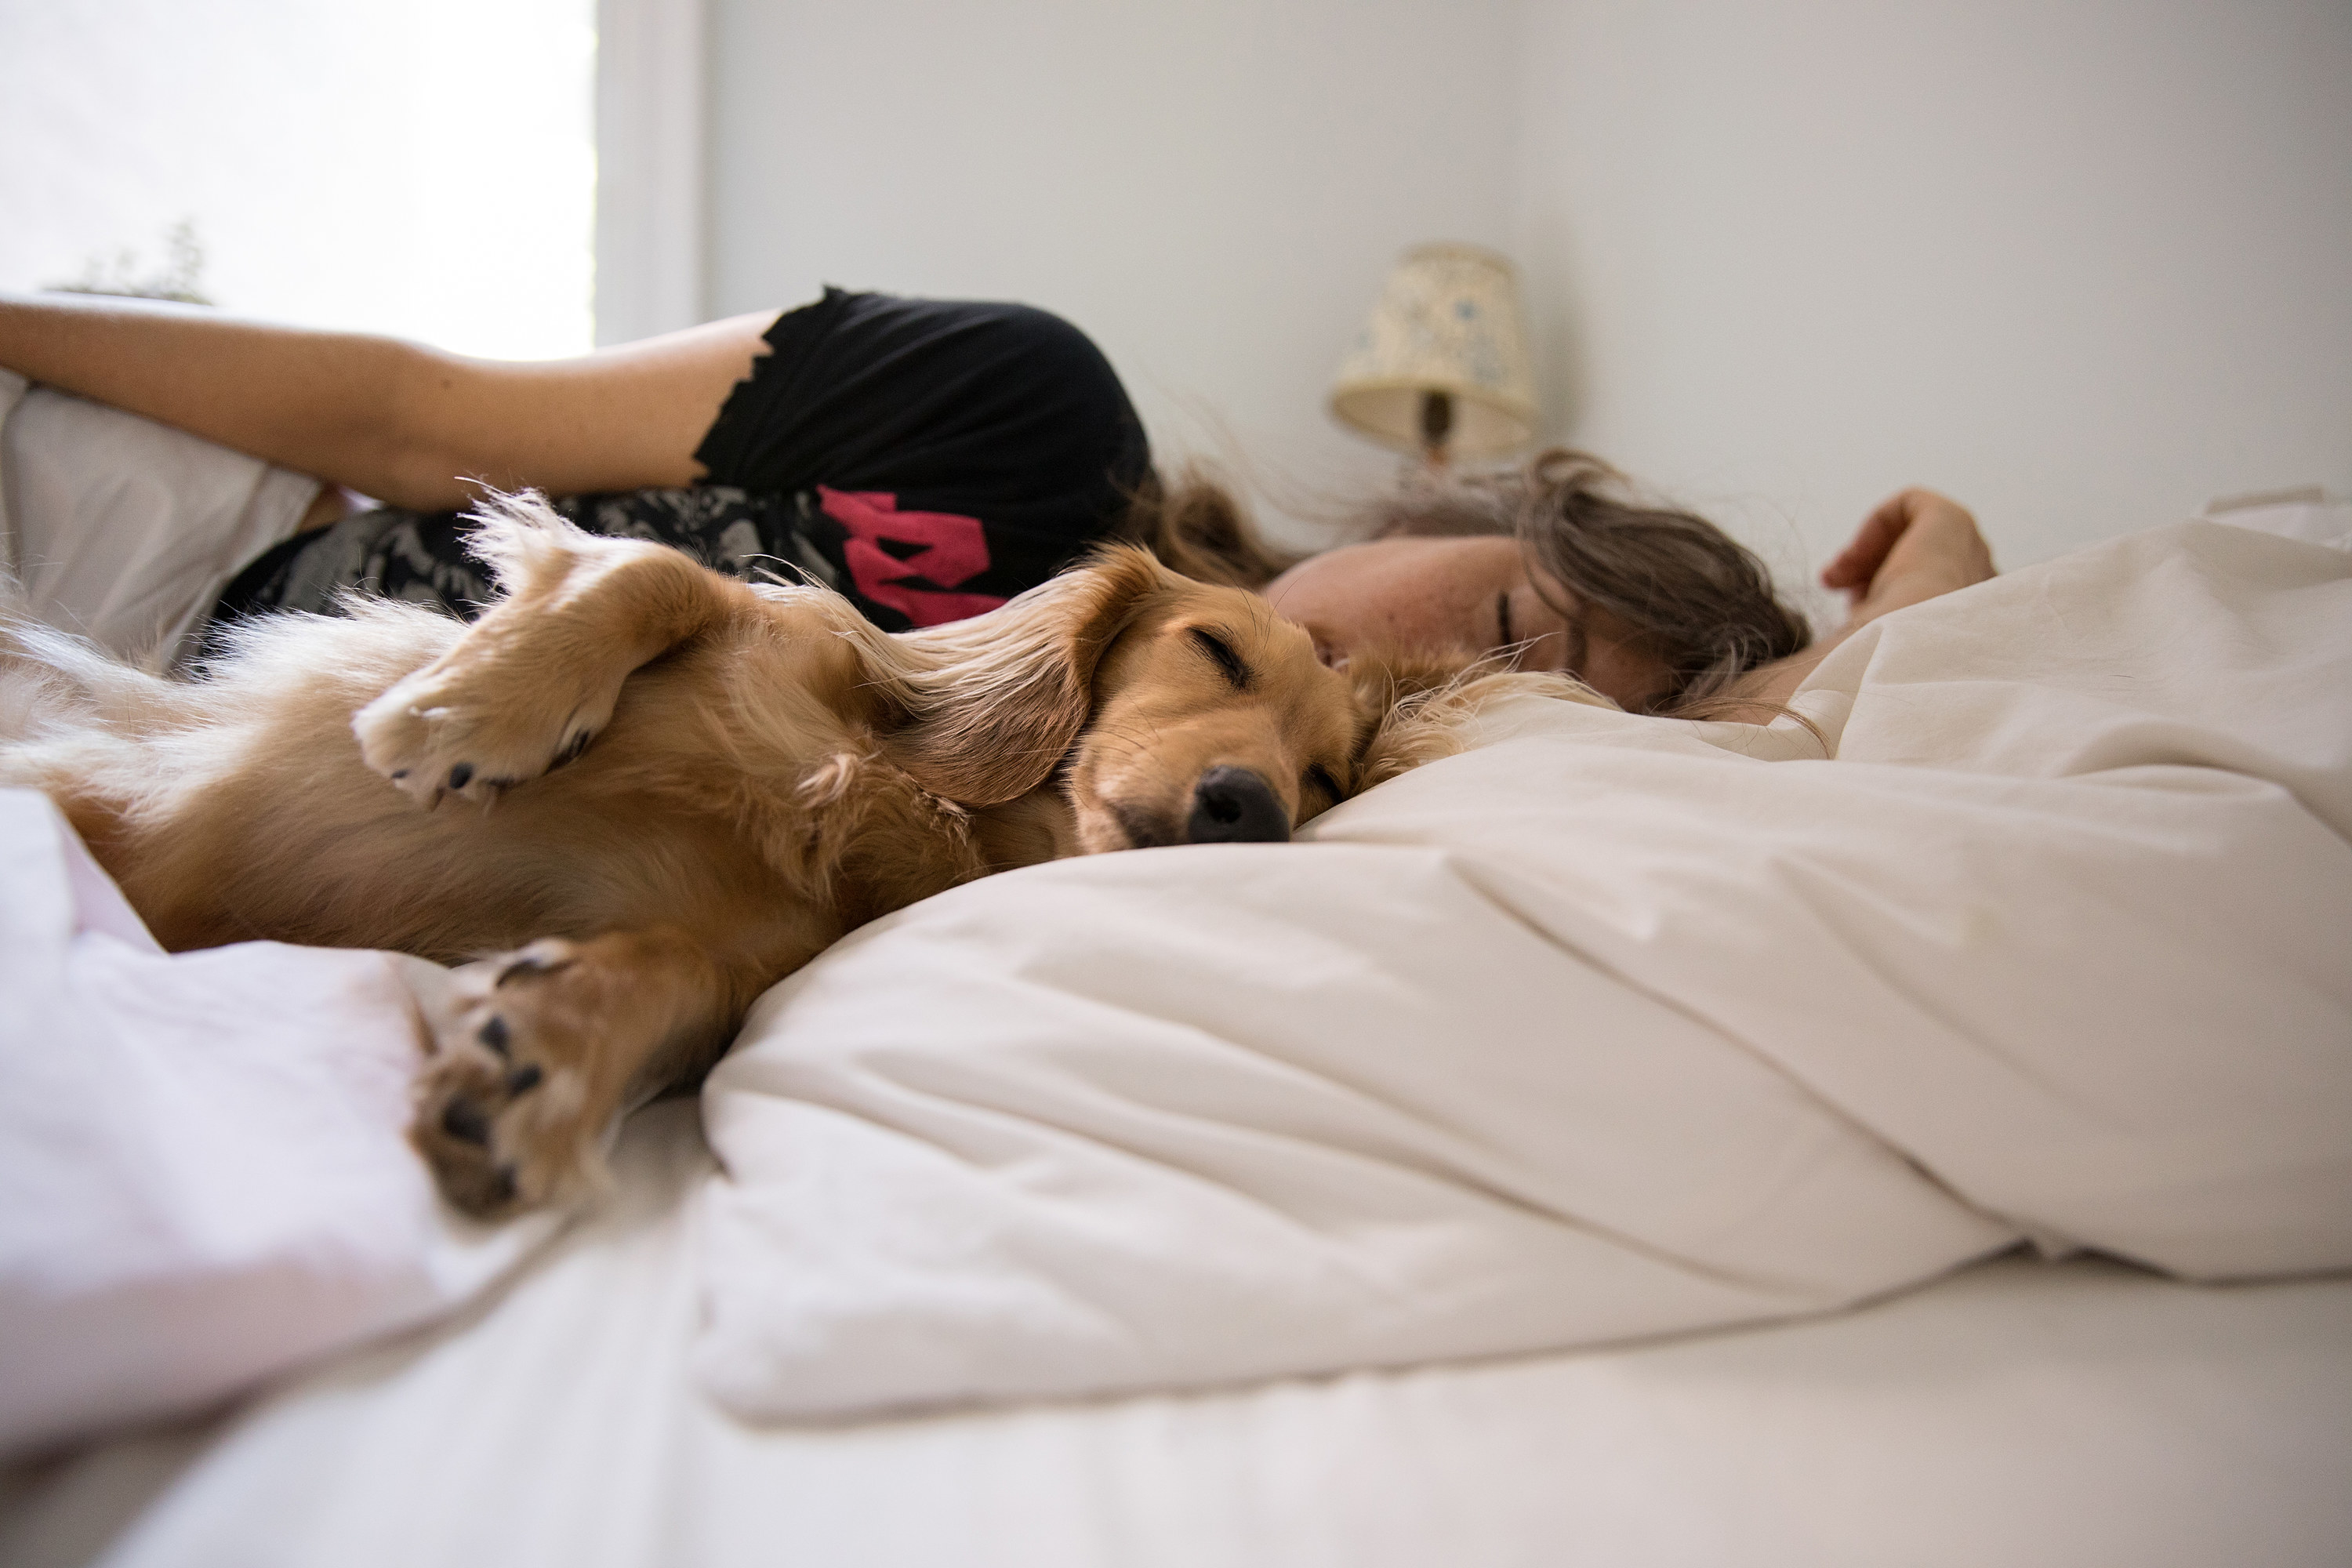 a dog lying next to owner in bed